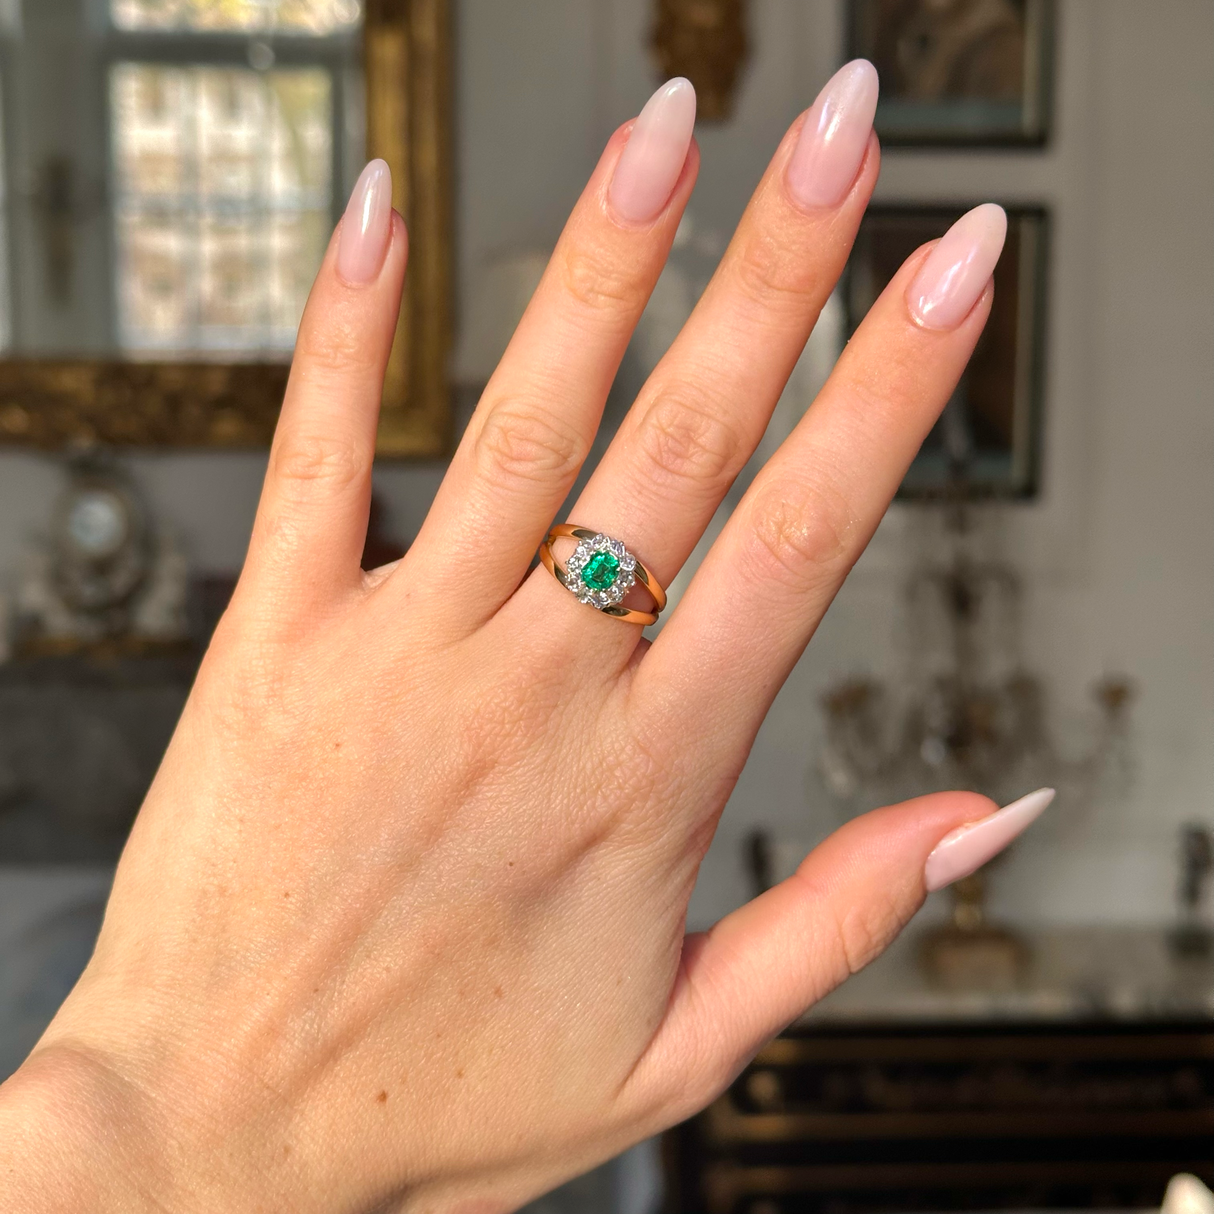 Vintage emerald and diamond cluster ring on hand. 